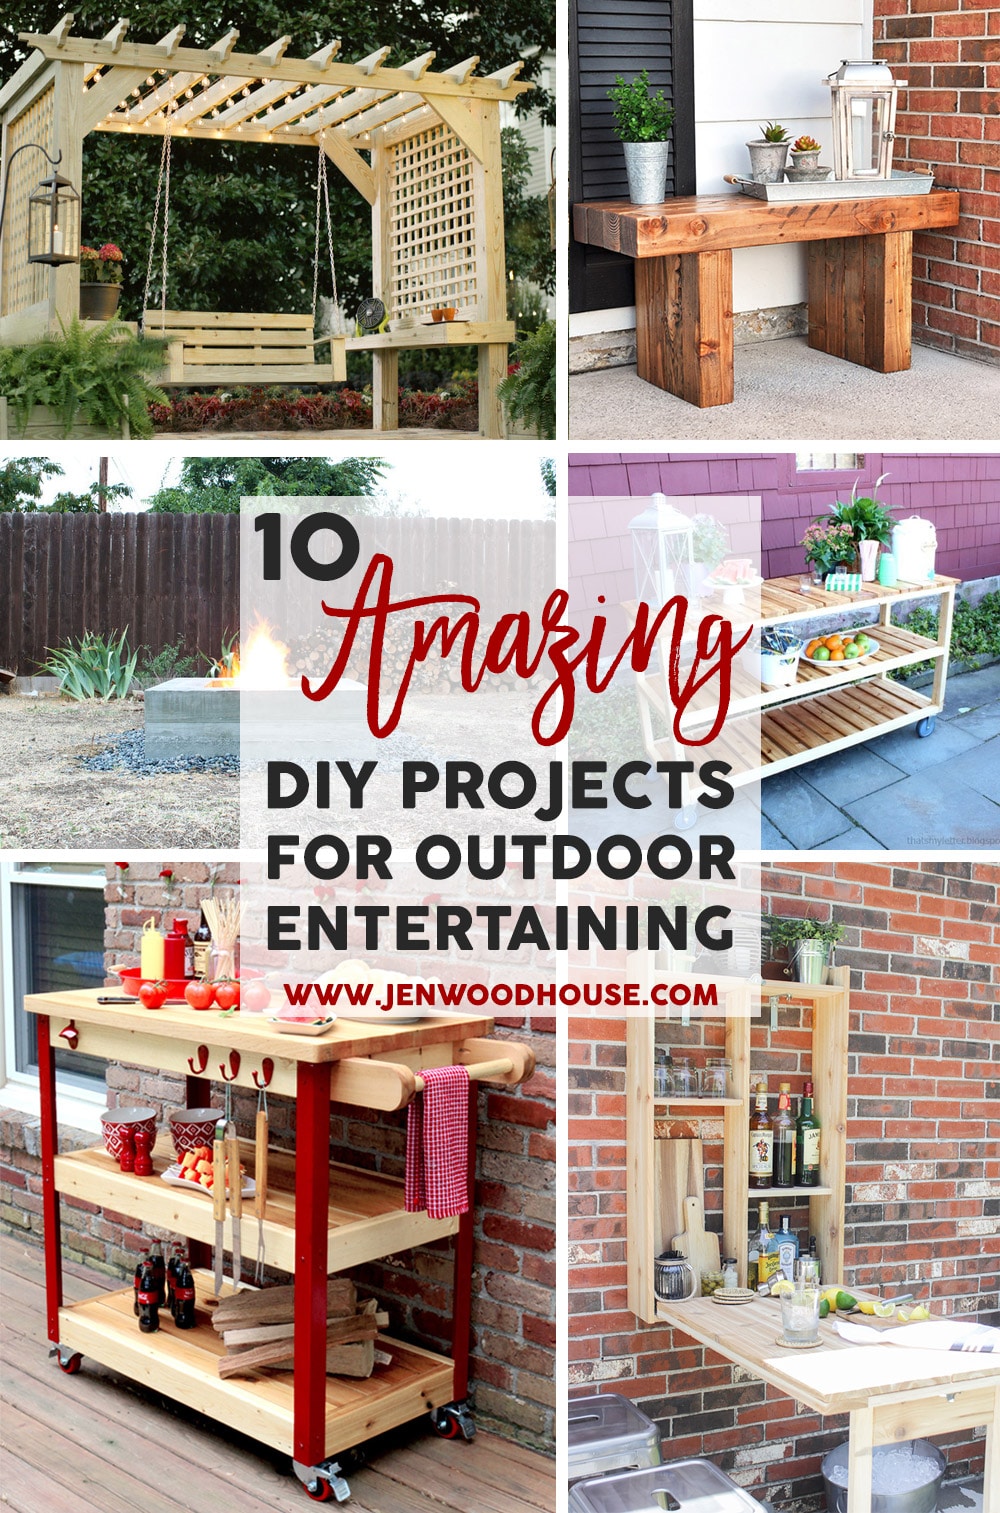 Spruce up your backyard with these 10 amazing DIY project ideas that will take your outdoor entertaining to the next level.